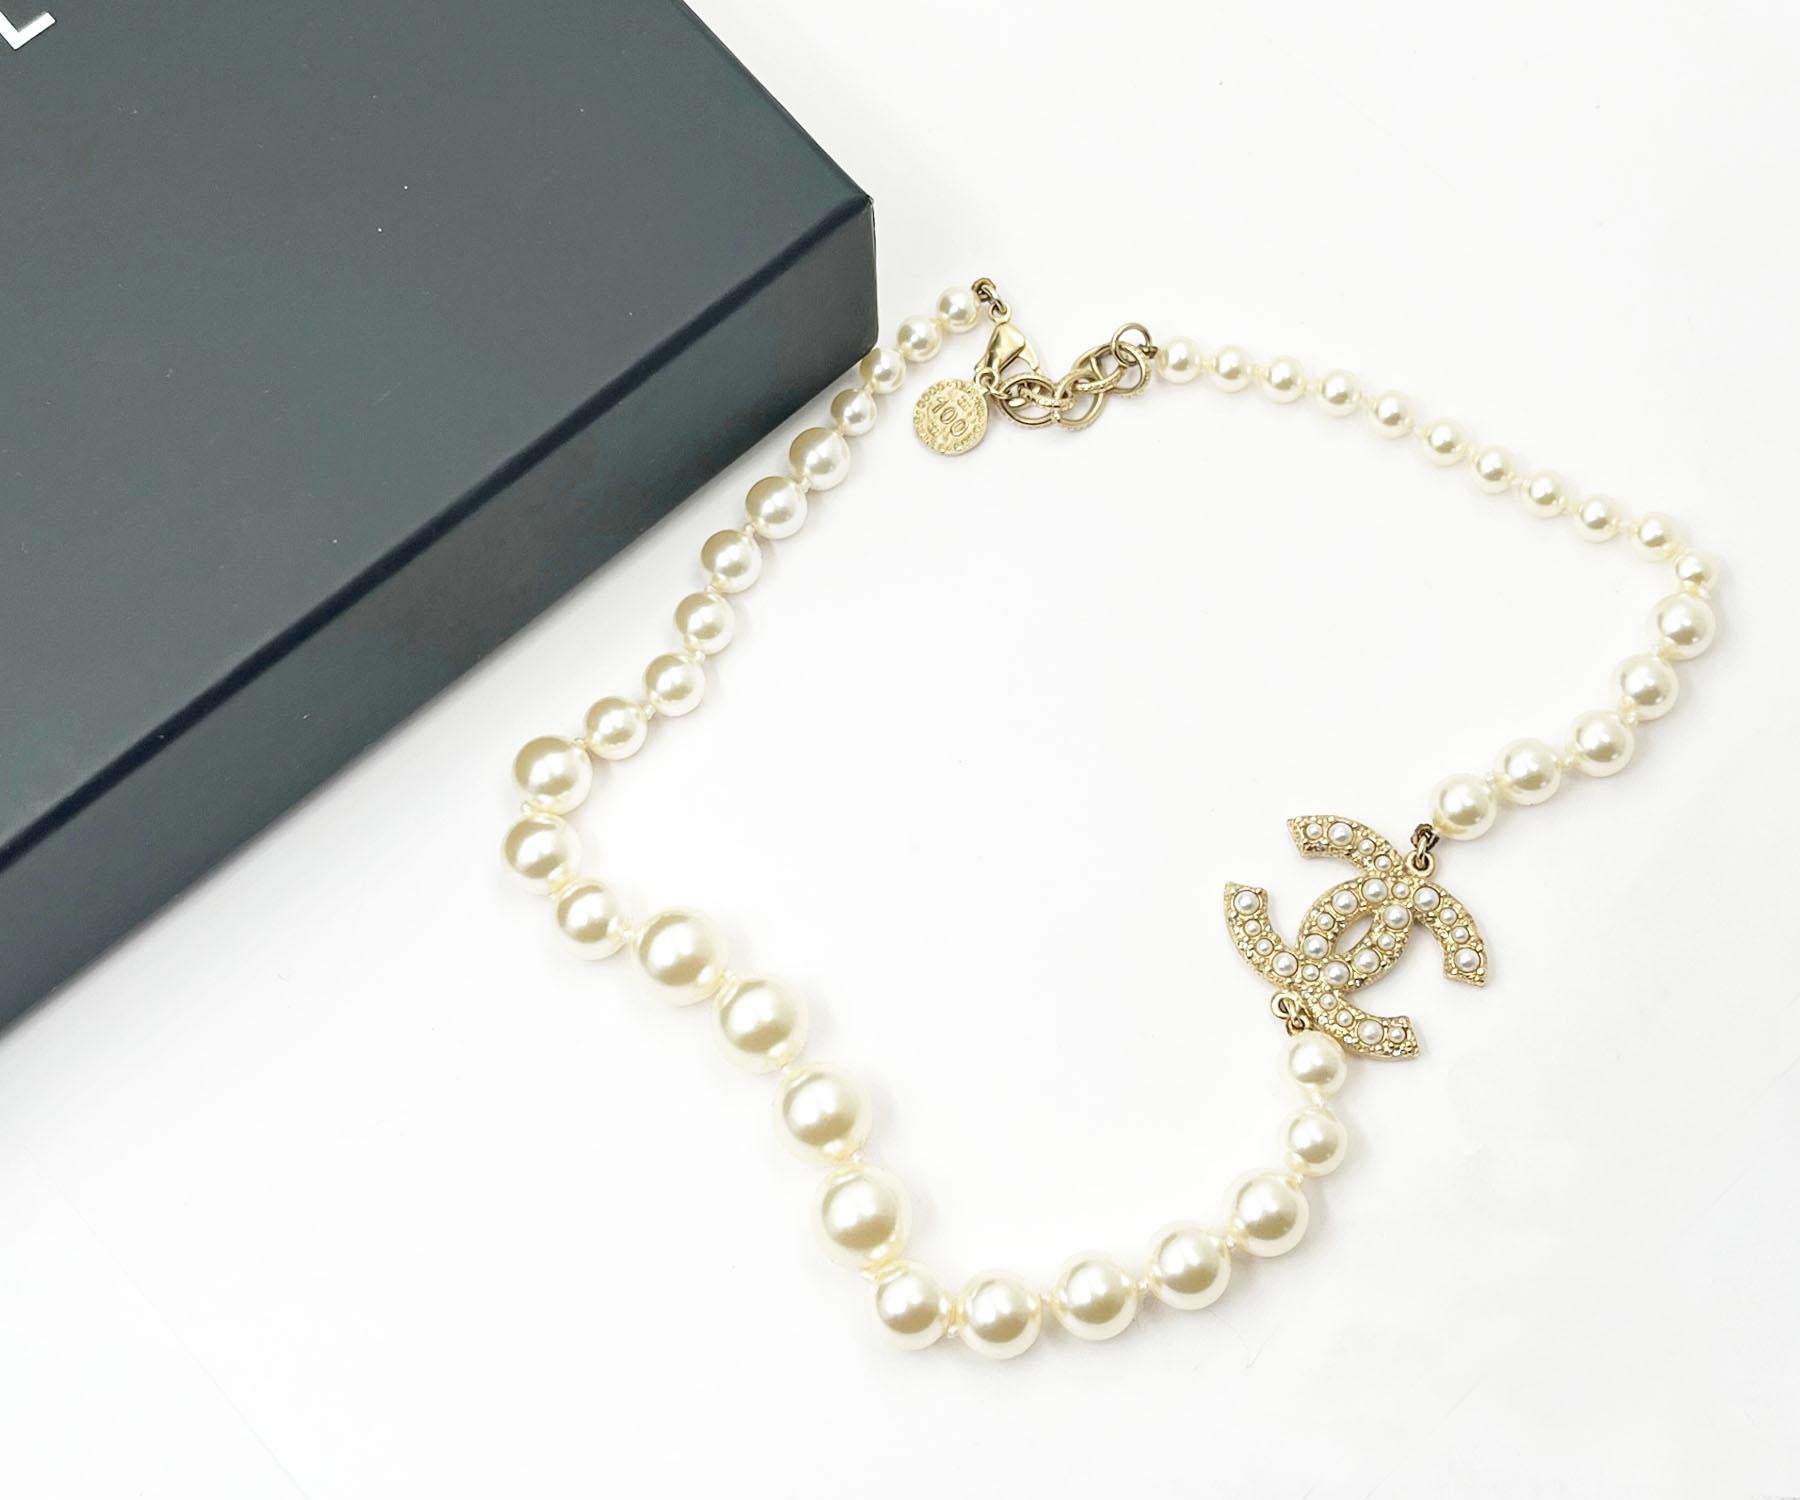 Chanel Gold CC Pearl Short Pearl Necklace 100 Year Anniversary

*Marked 21
*Made in France
*Comes with the original box and pouch

-It is approximately 18